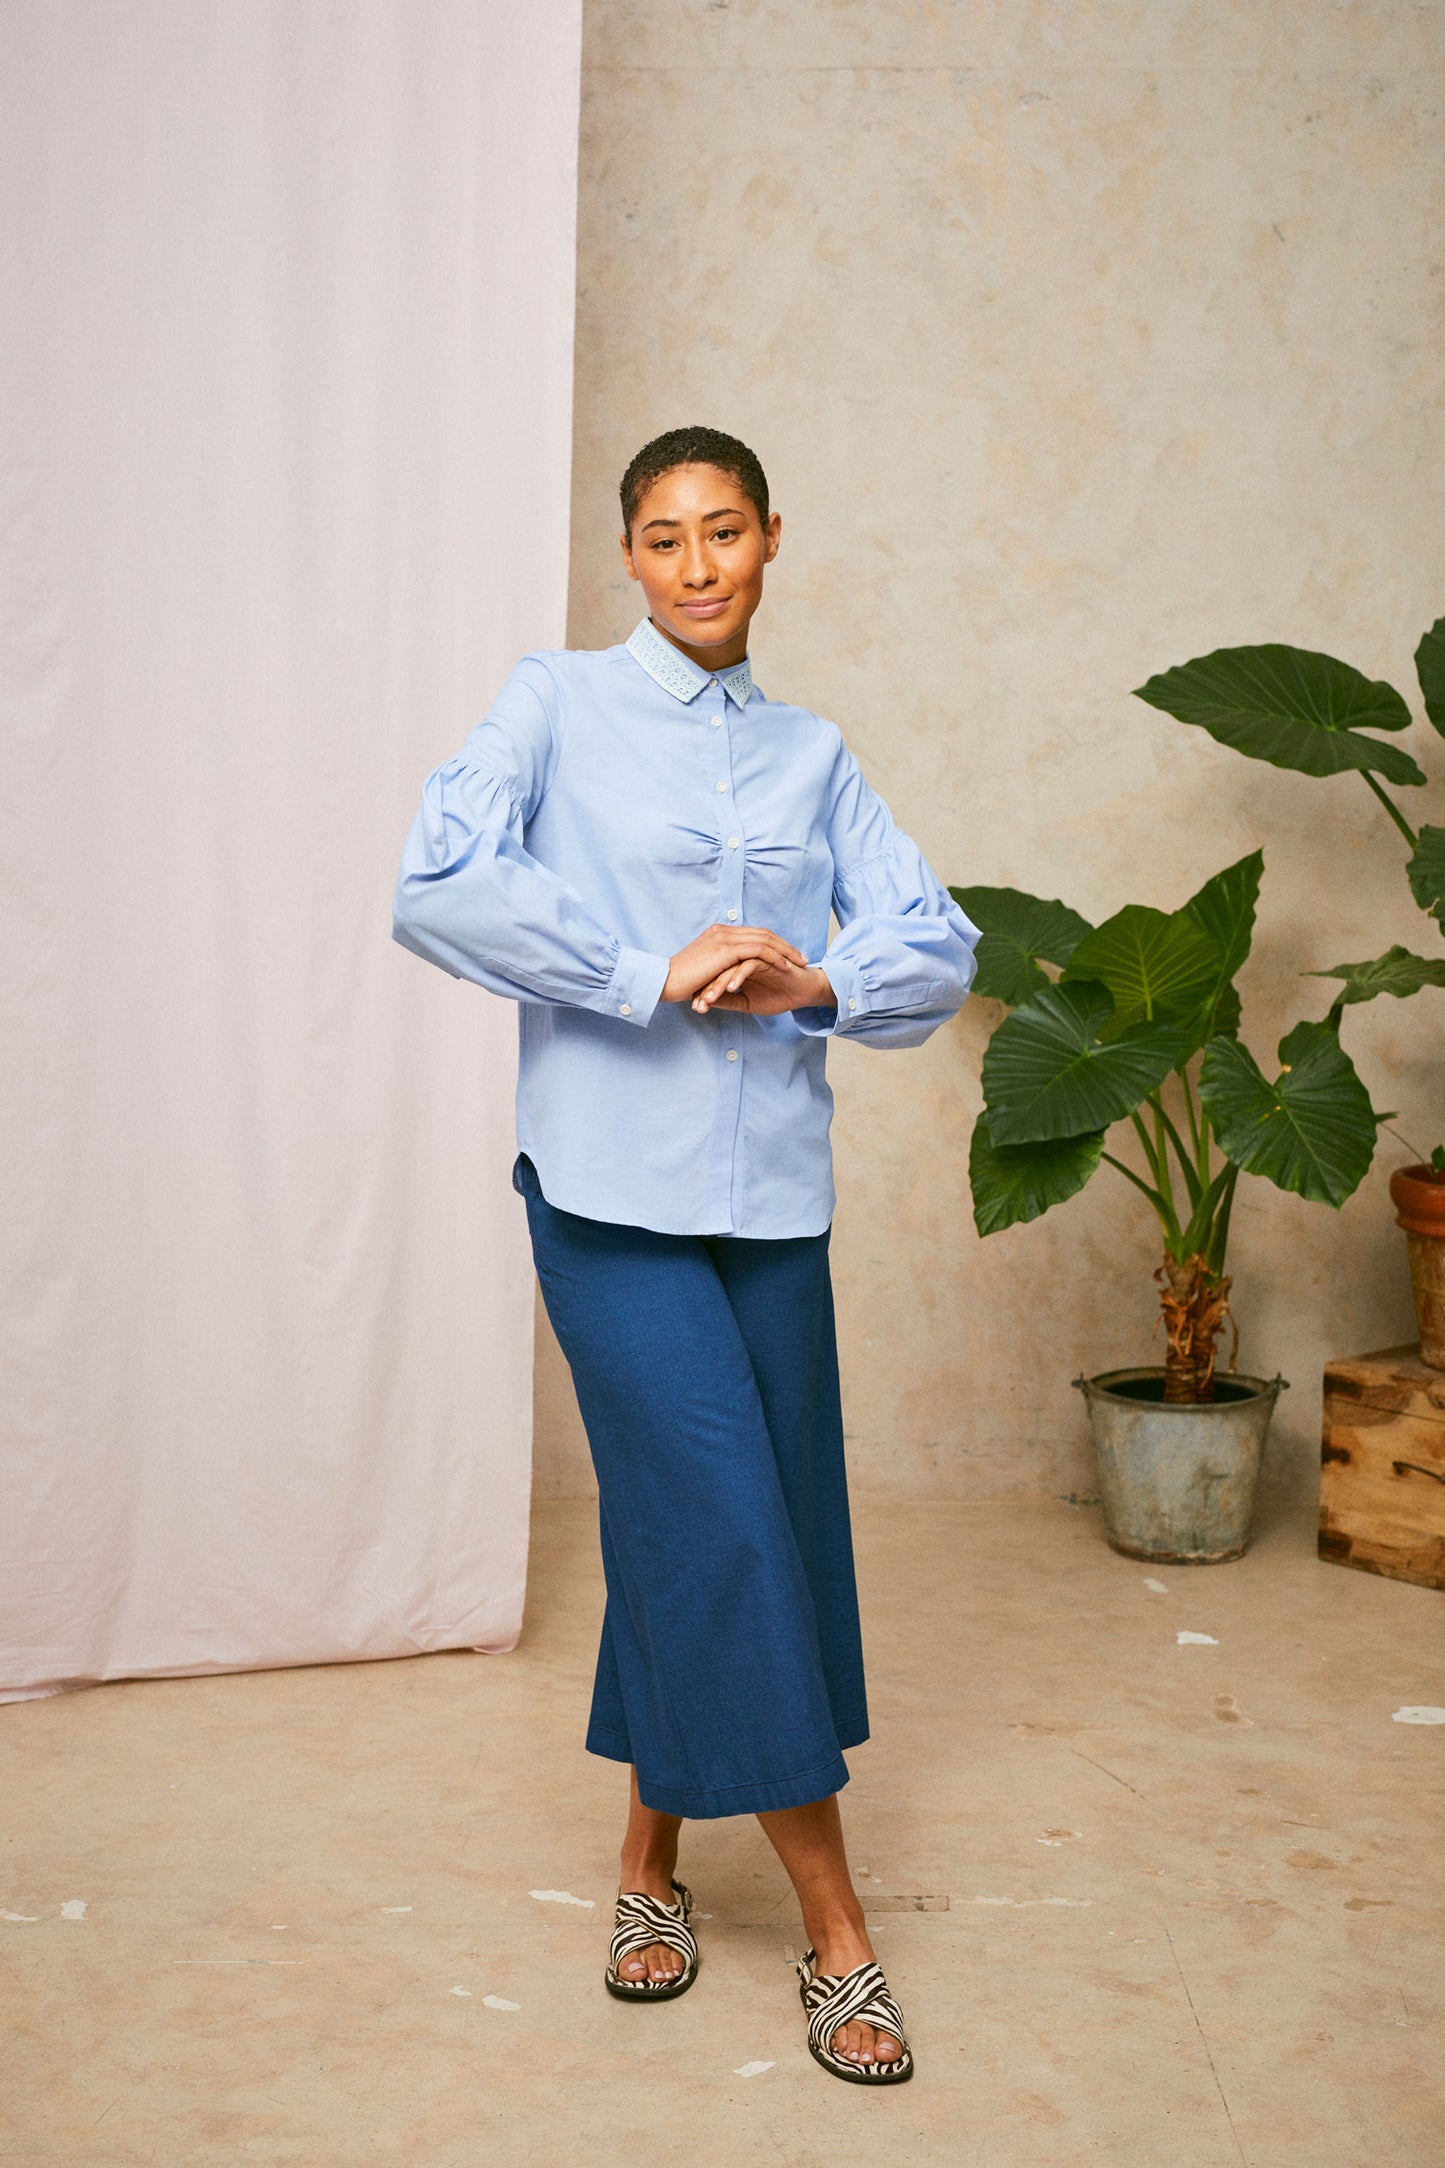 Model wears Saywood's pale blue shirt, the Edi Volume Sleeve Shirt with lace collar, with the natural indigo Japanese denim Amelia wide leg trousers and zebra print sandals. A plant and drop of pink fabric can be seen in the background. 